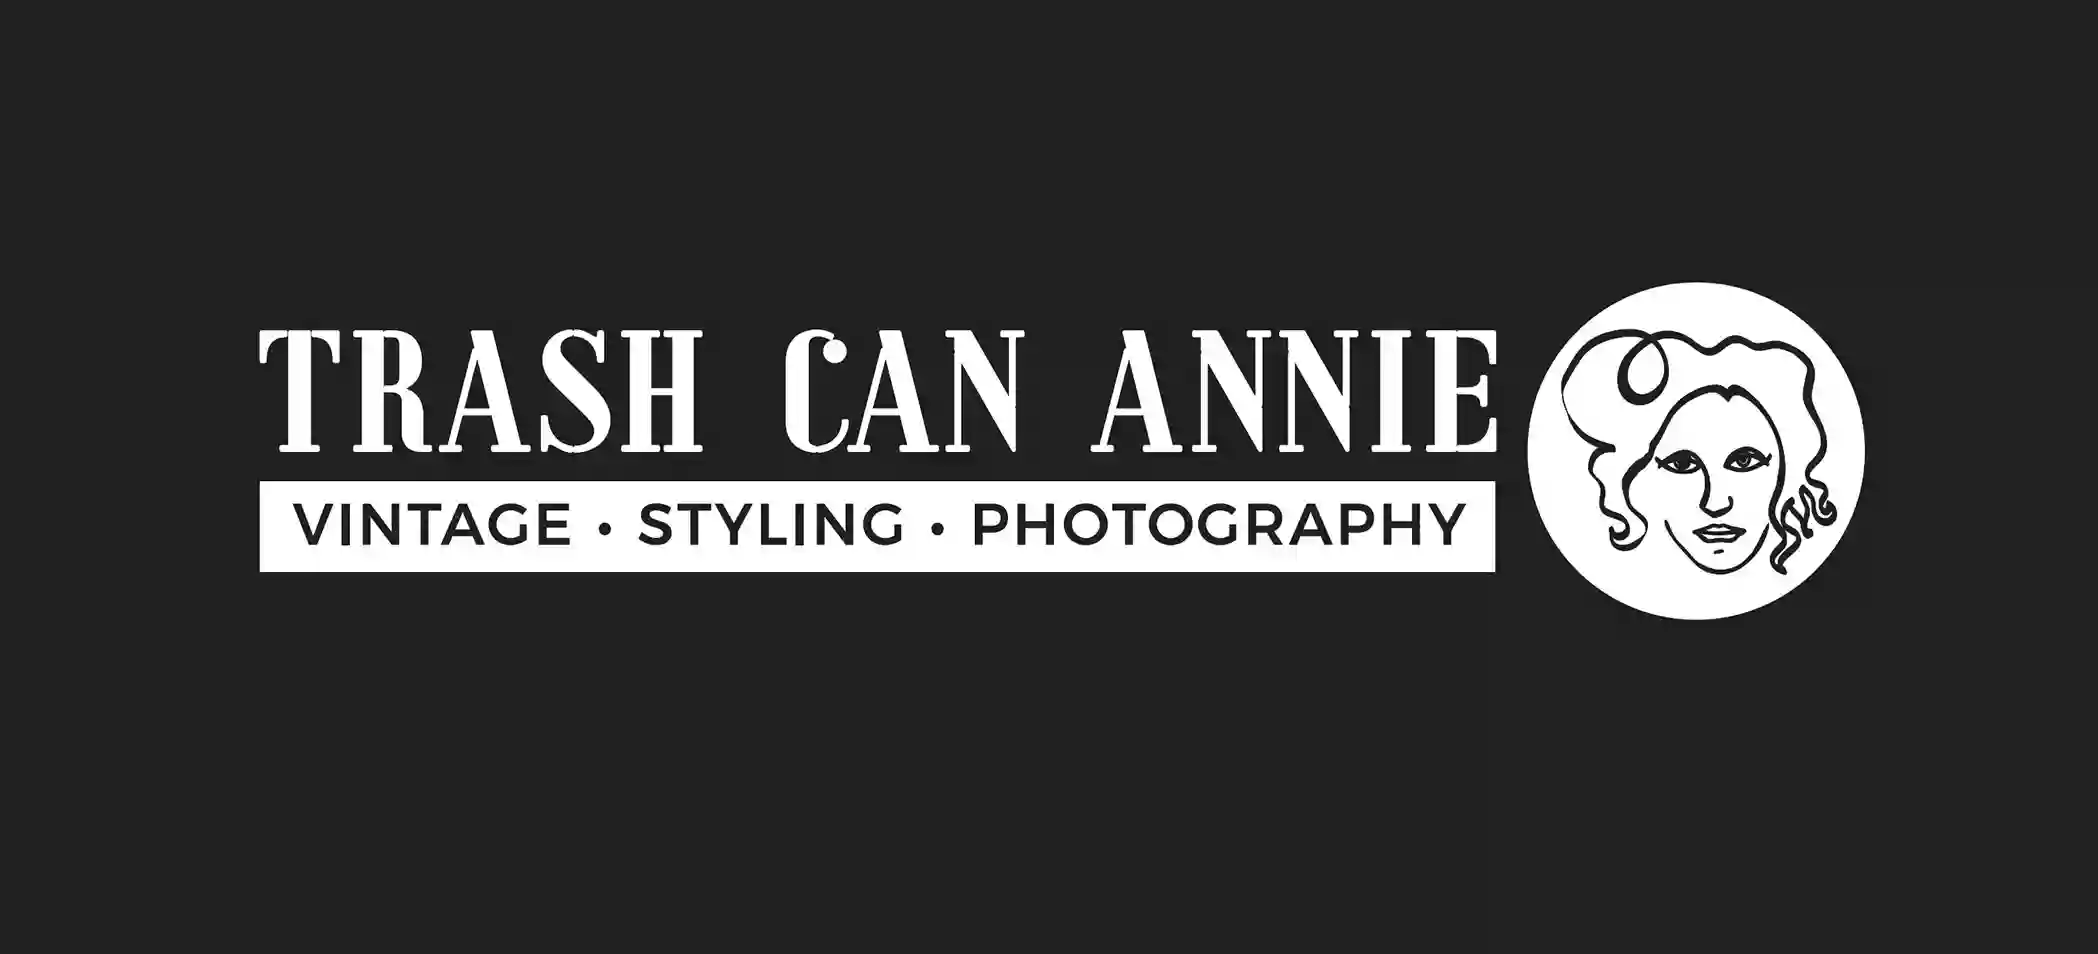 Trash Can Annie | Vintage, Styling & Photography